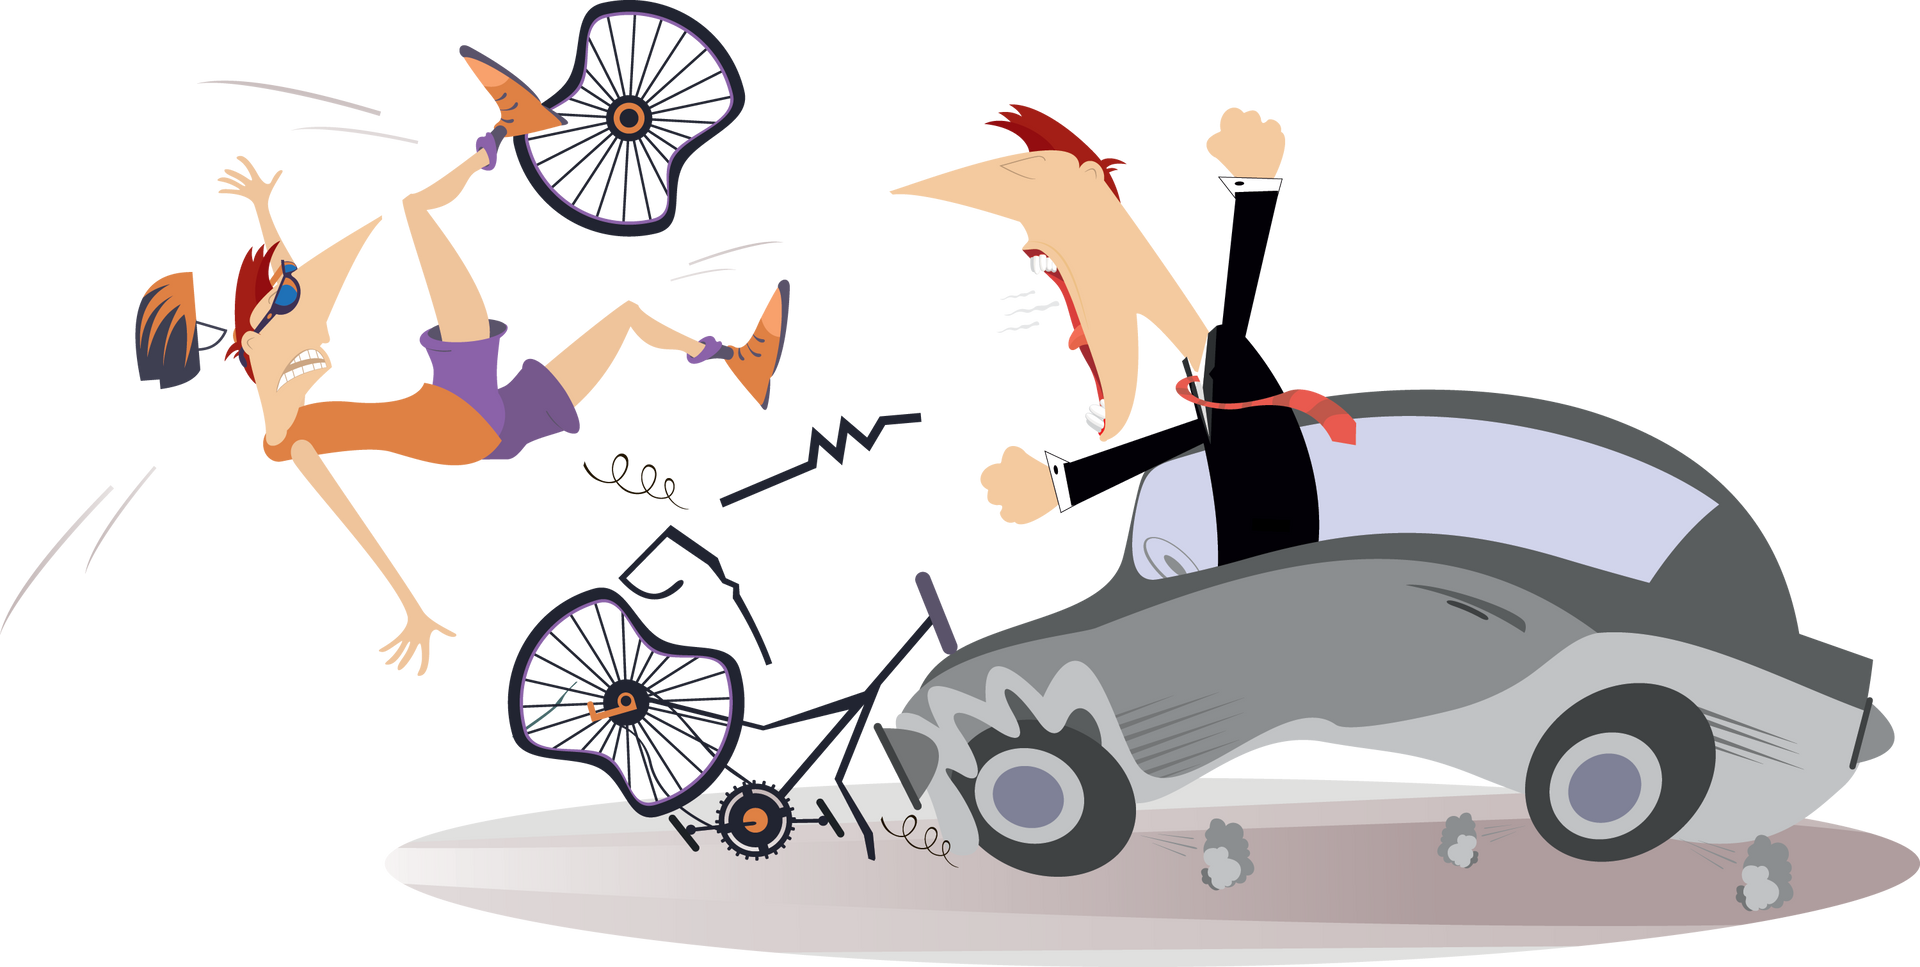 Cyclist vs. Motor Vehicle Accident